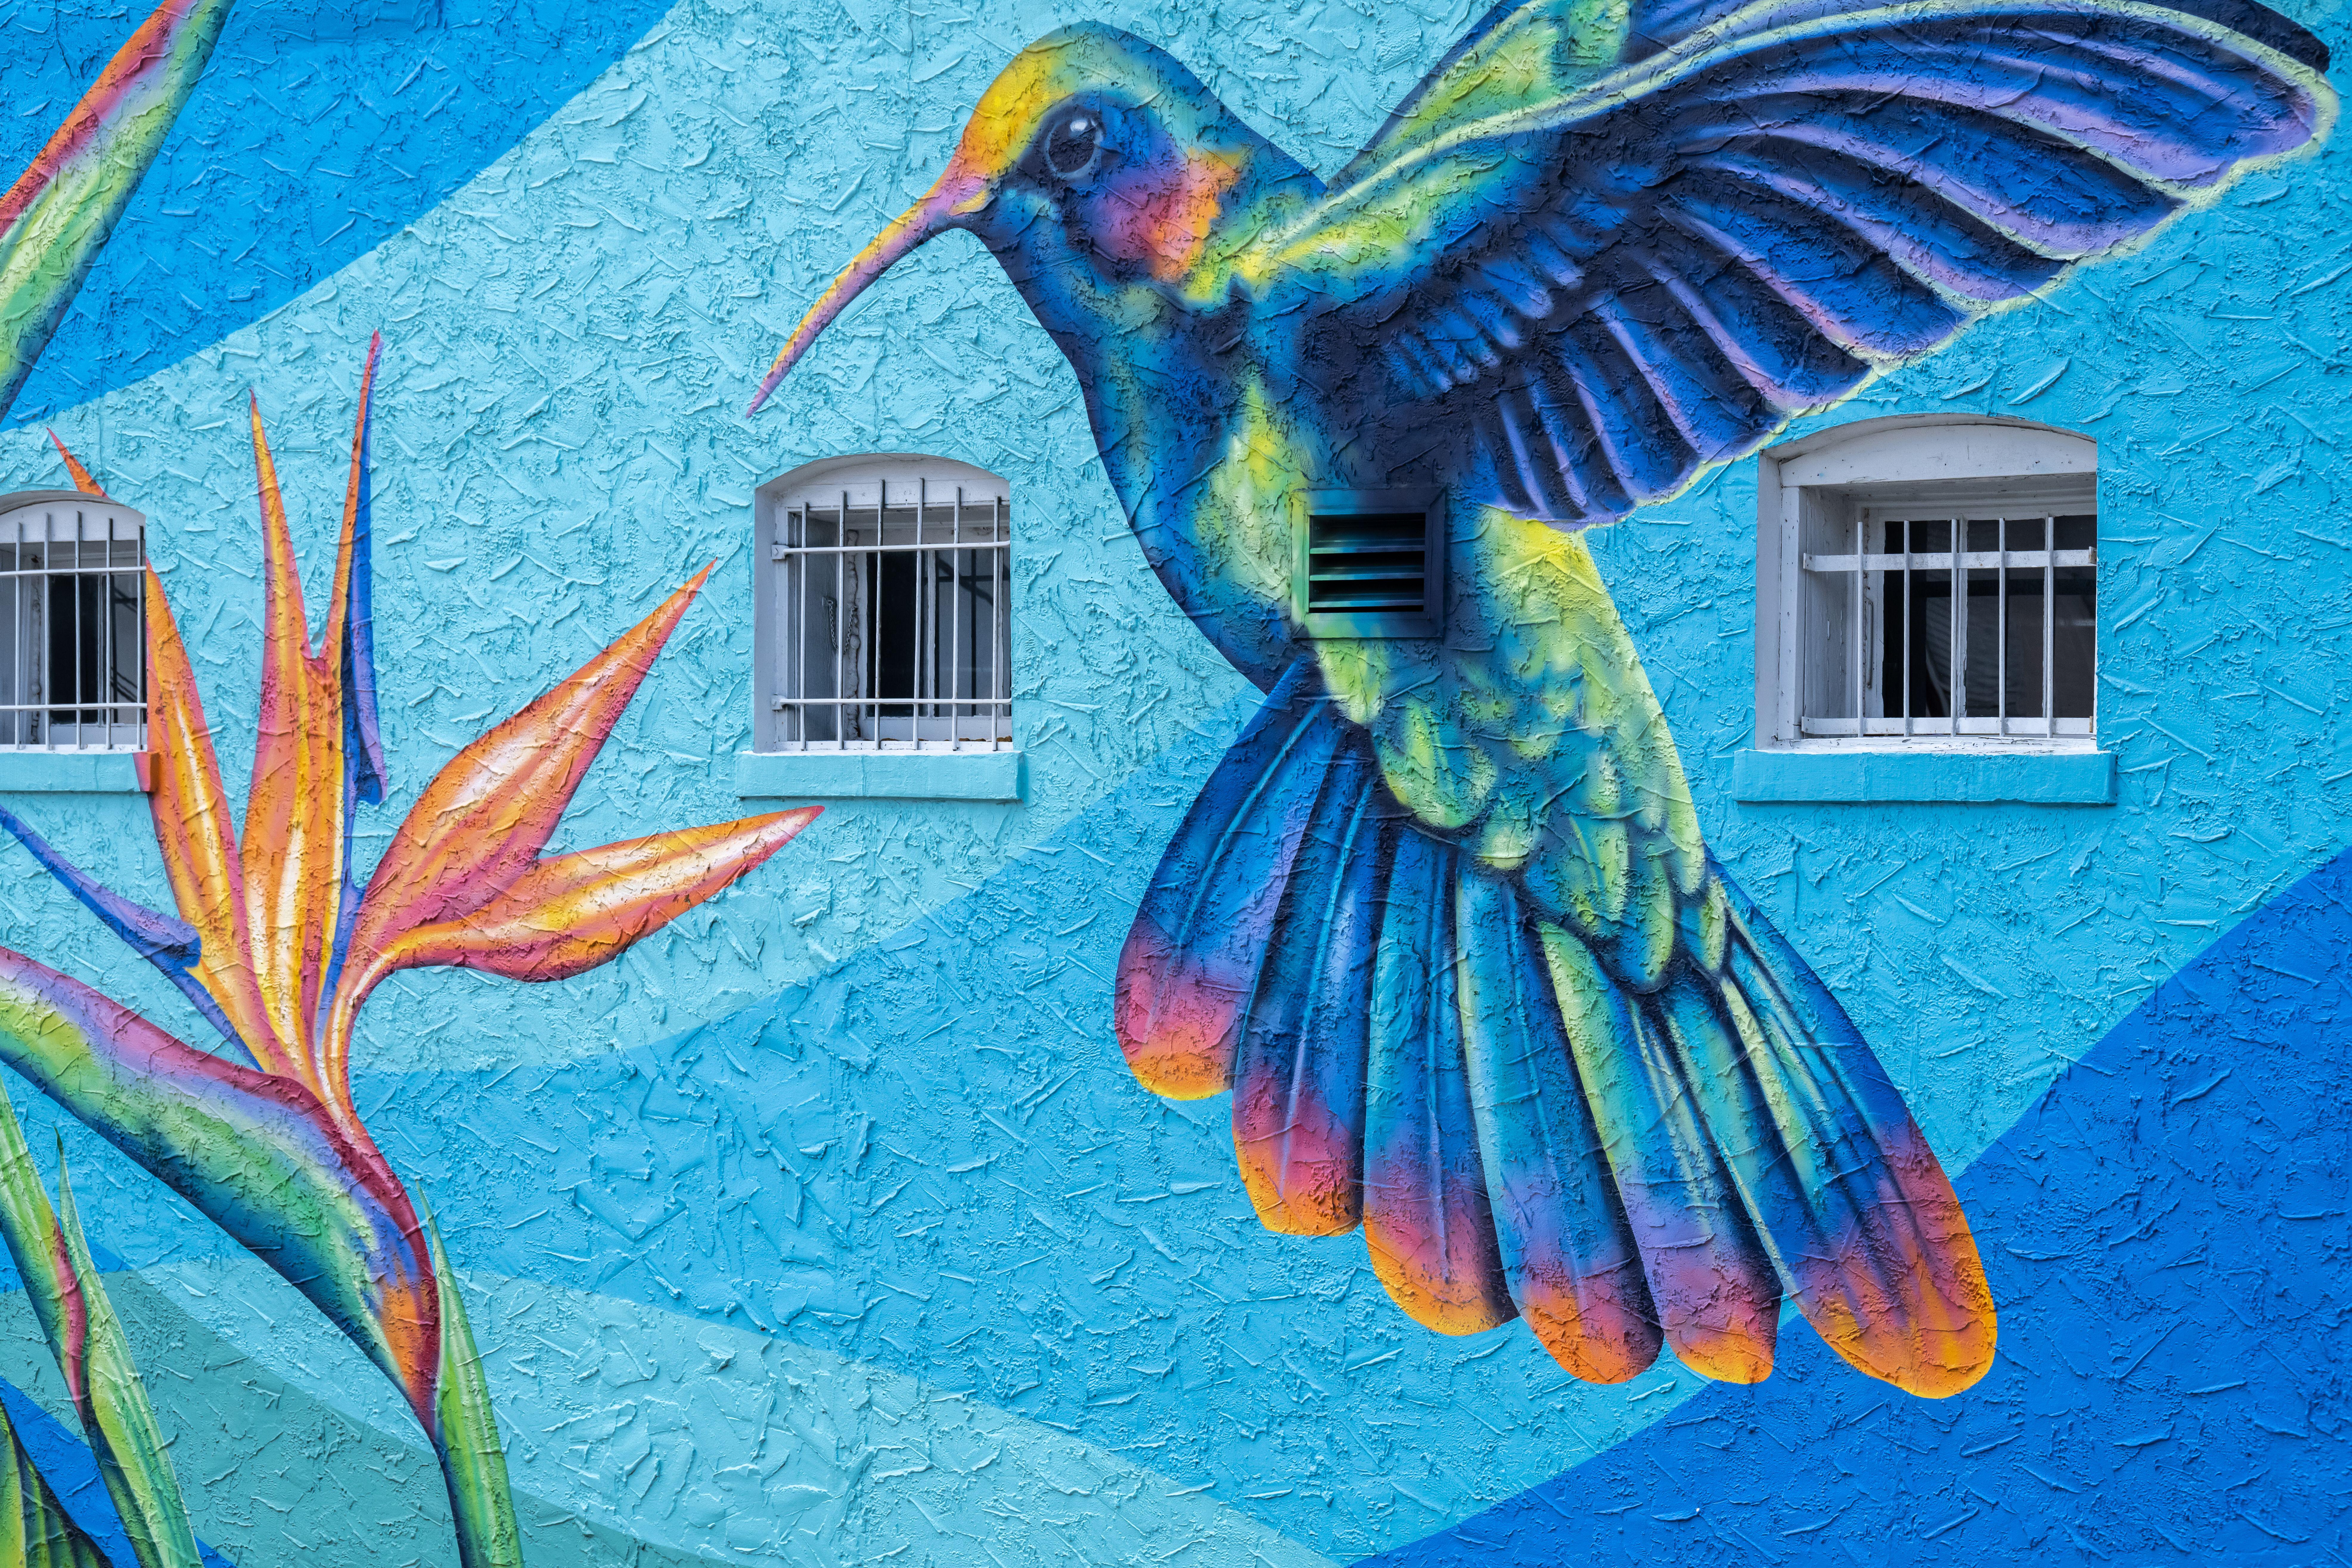 Stunning murals like this hummingbird on boutique fashion store Doxology in Winter Garden bring a colourful edge to the city